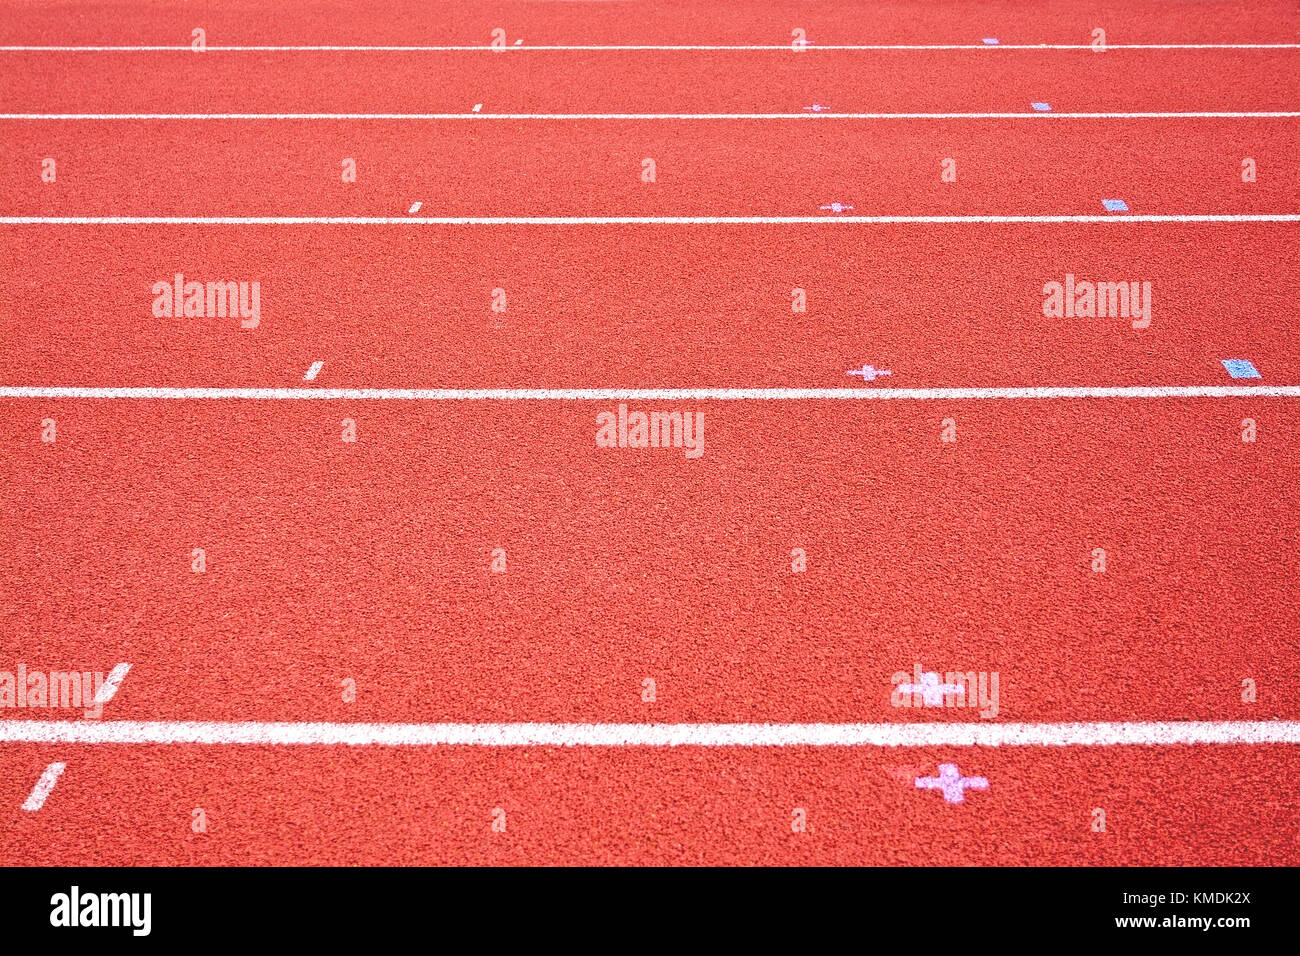 Red tracking field for running competition background texture. Stock Photo